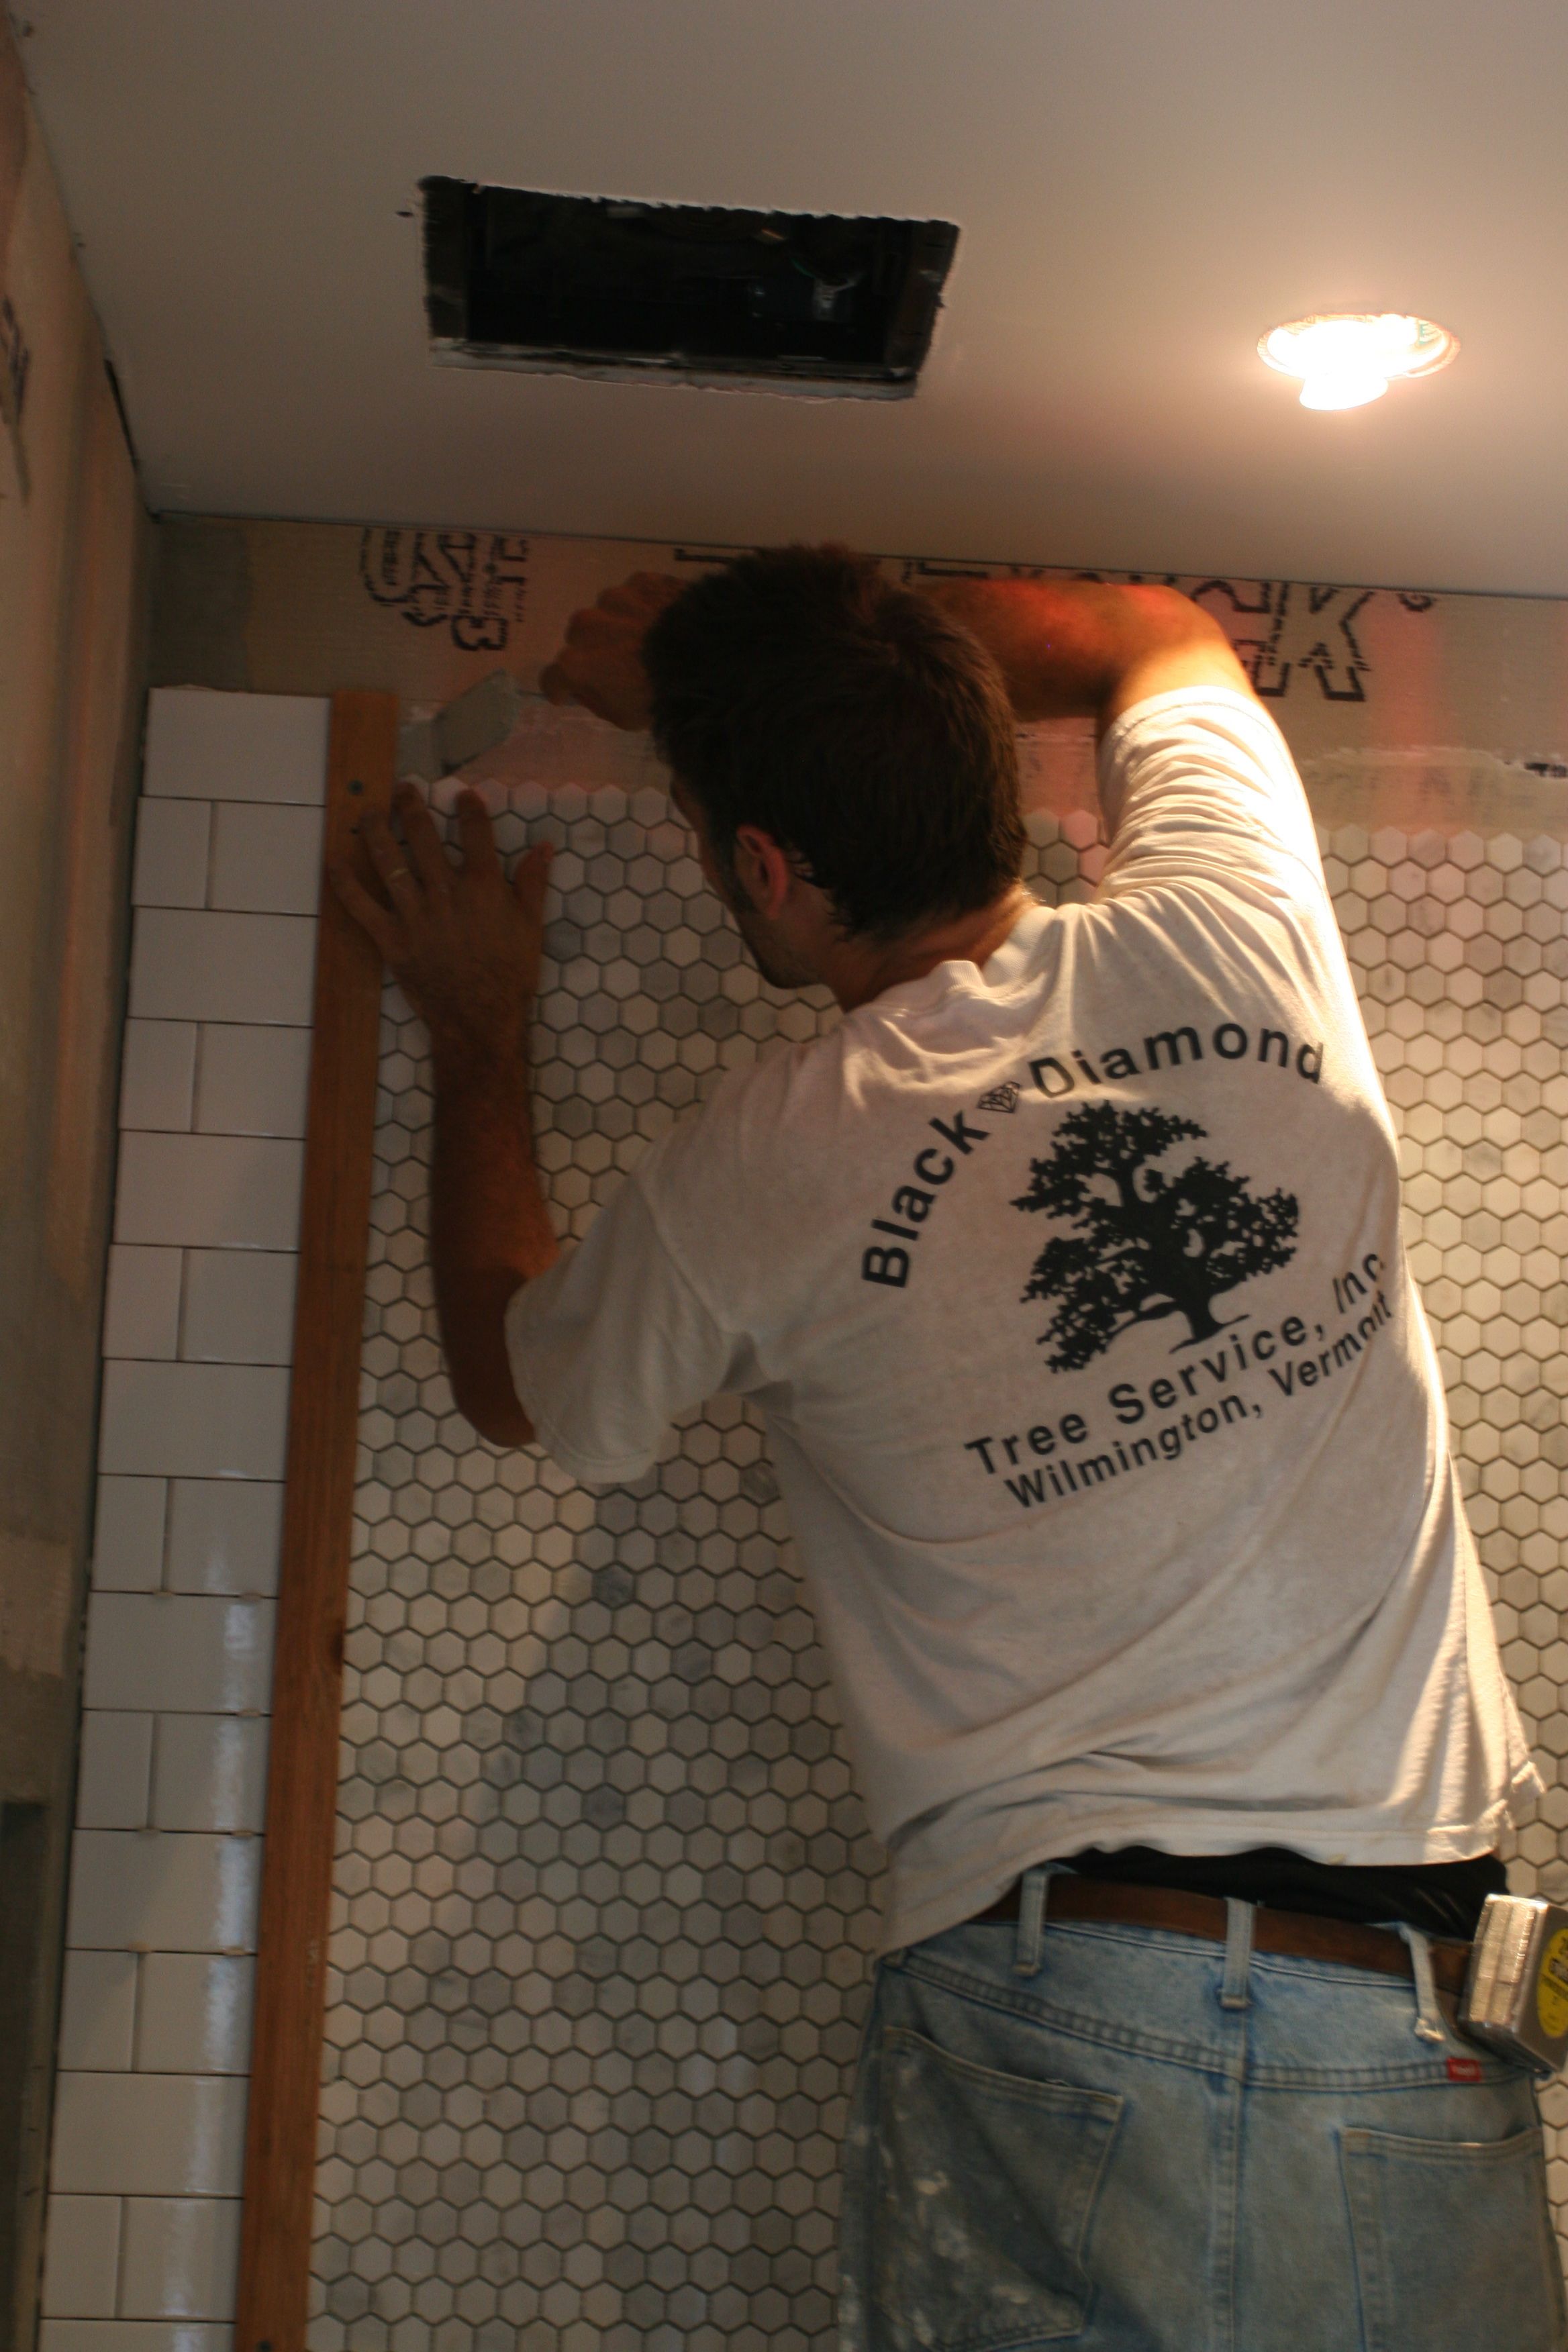 Carefully scraping back the excess thin-set so tomorrow's tile can be applied to a fresh, smooth wall.